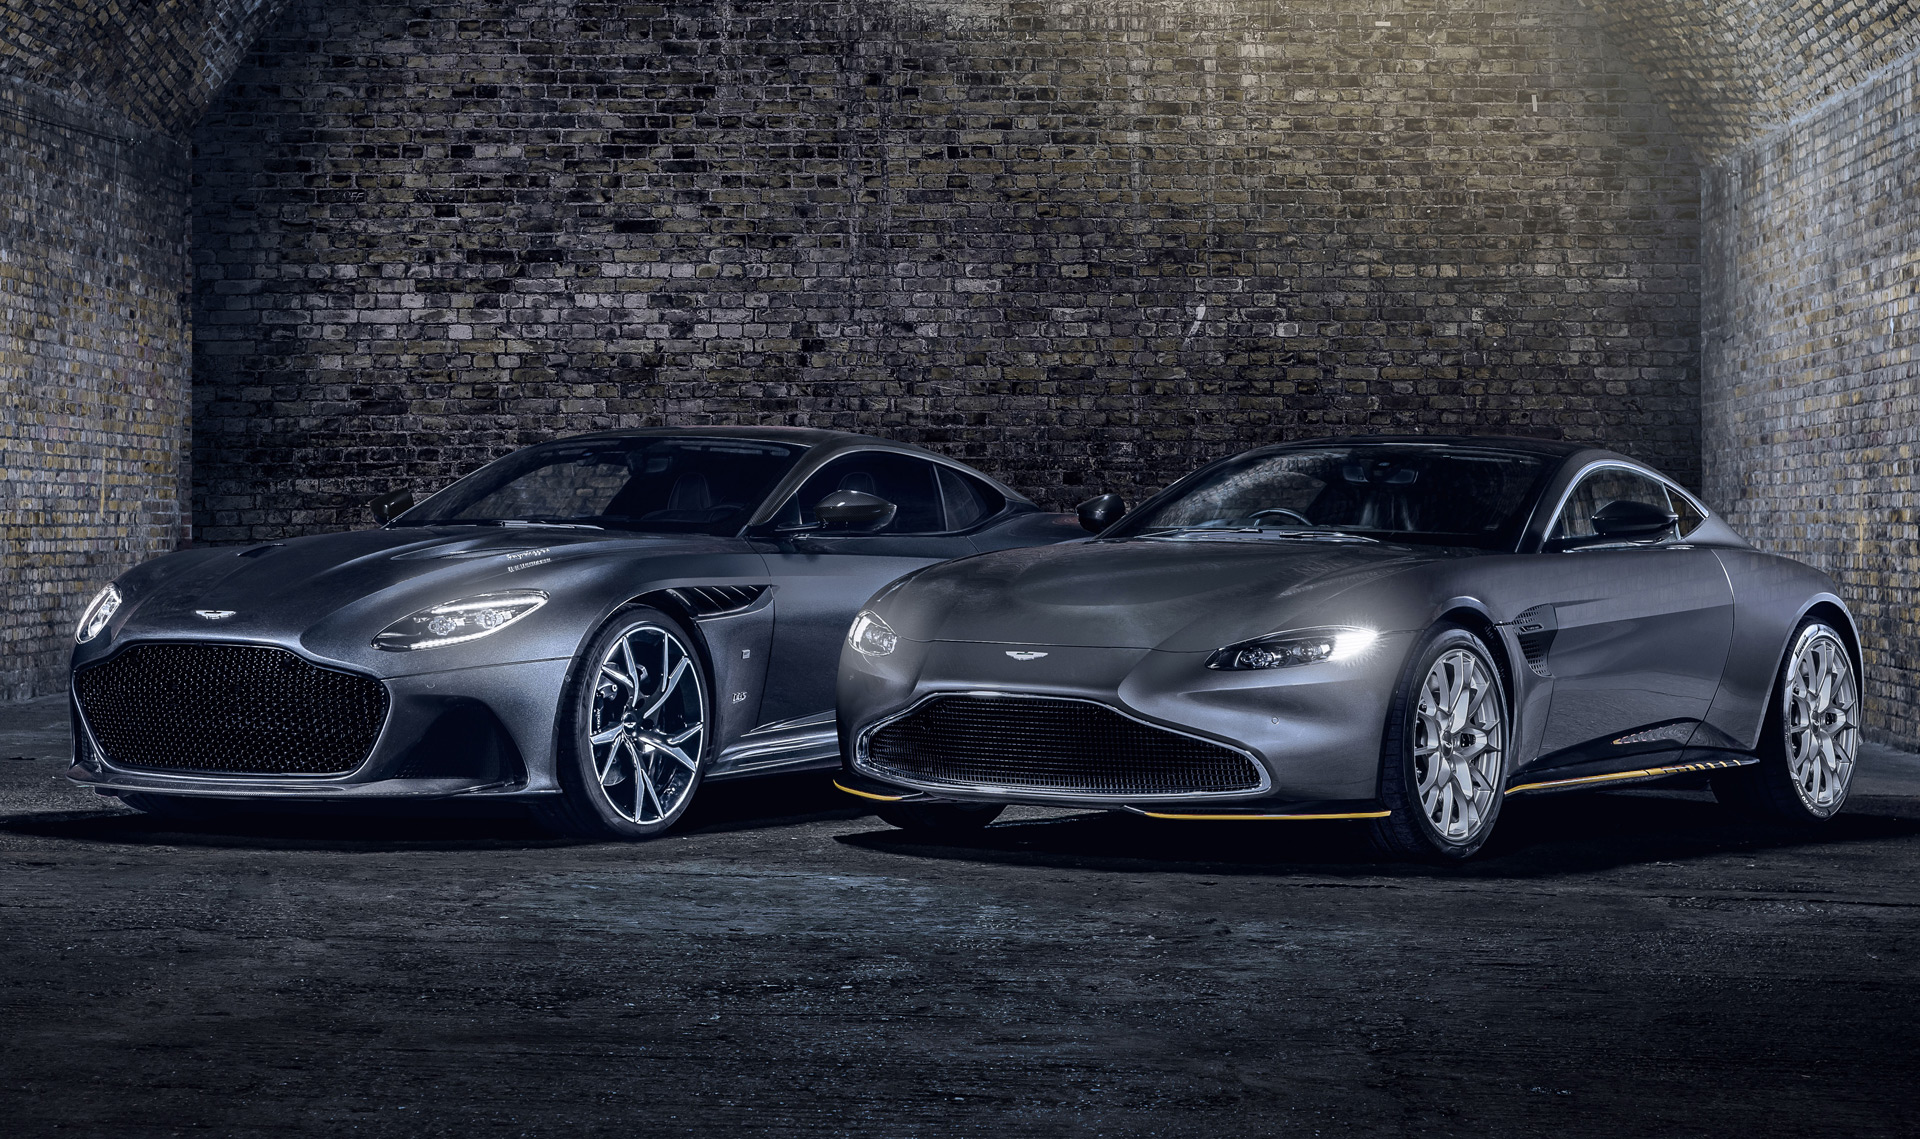 New 007 Edition Aston Martin Dbs And Vantage Take Inspiration From Bond Movie Cars